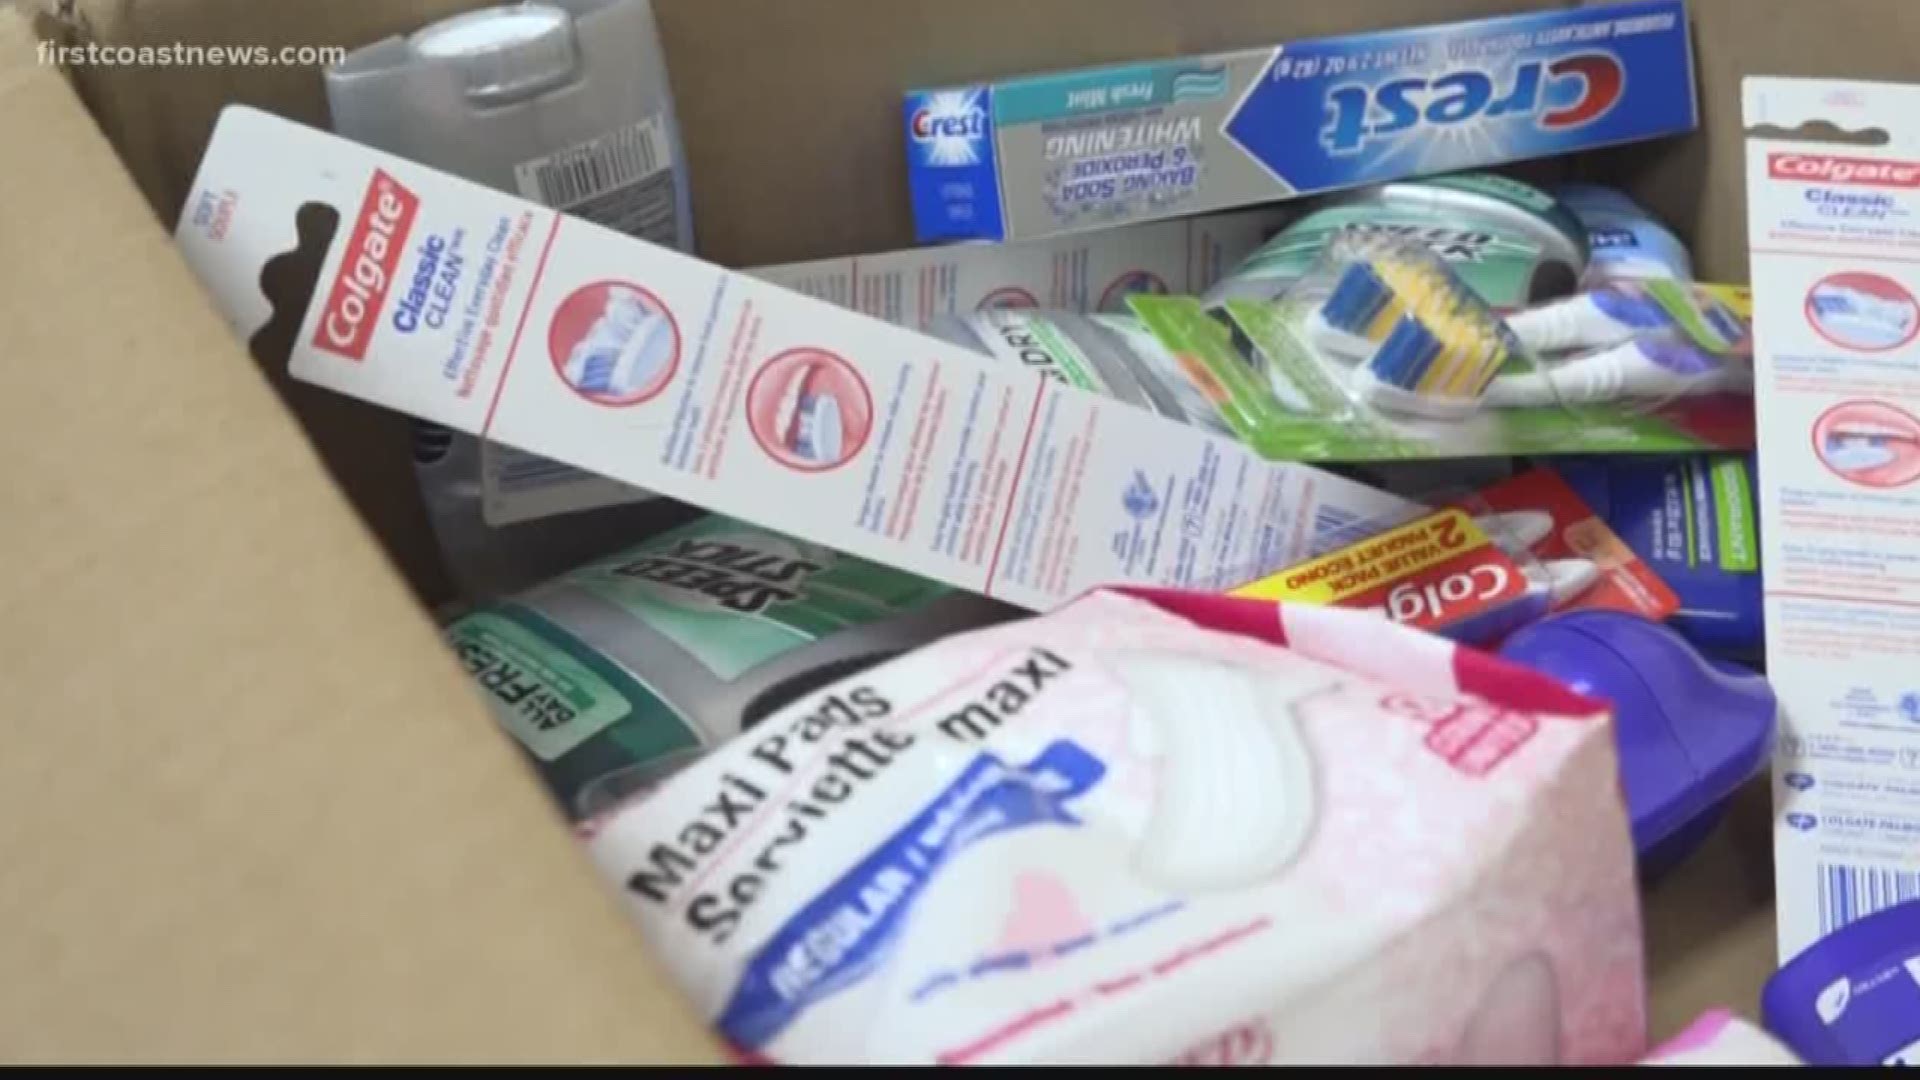 For most schools, back to school donations might include crayons, paper and pencils, but at Baker County Middle School, it's boxes of toiletry items for the Bobcats Care Closet.